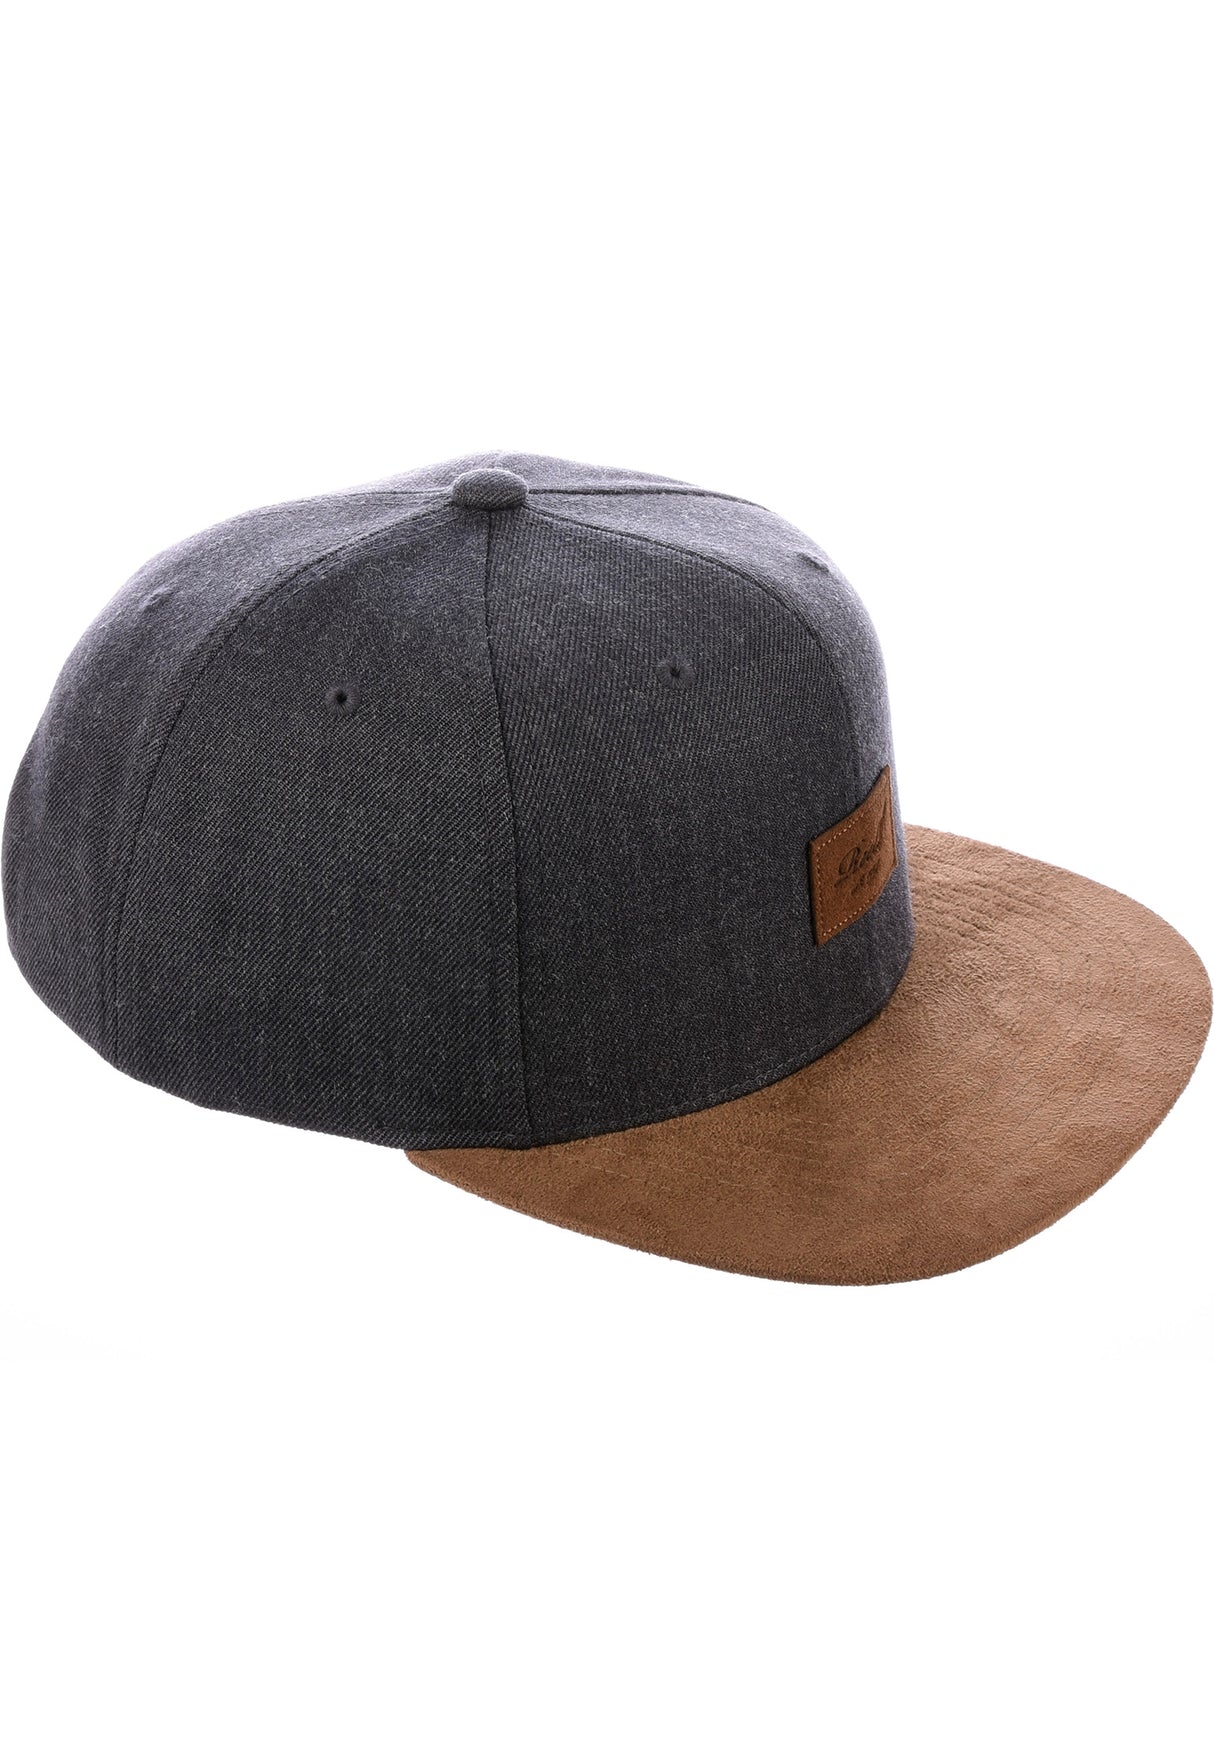 Suede 6-Panel heathercharcoal Close-Up2